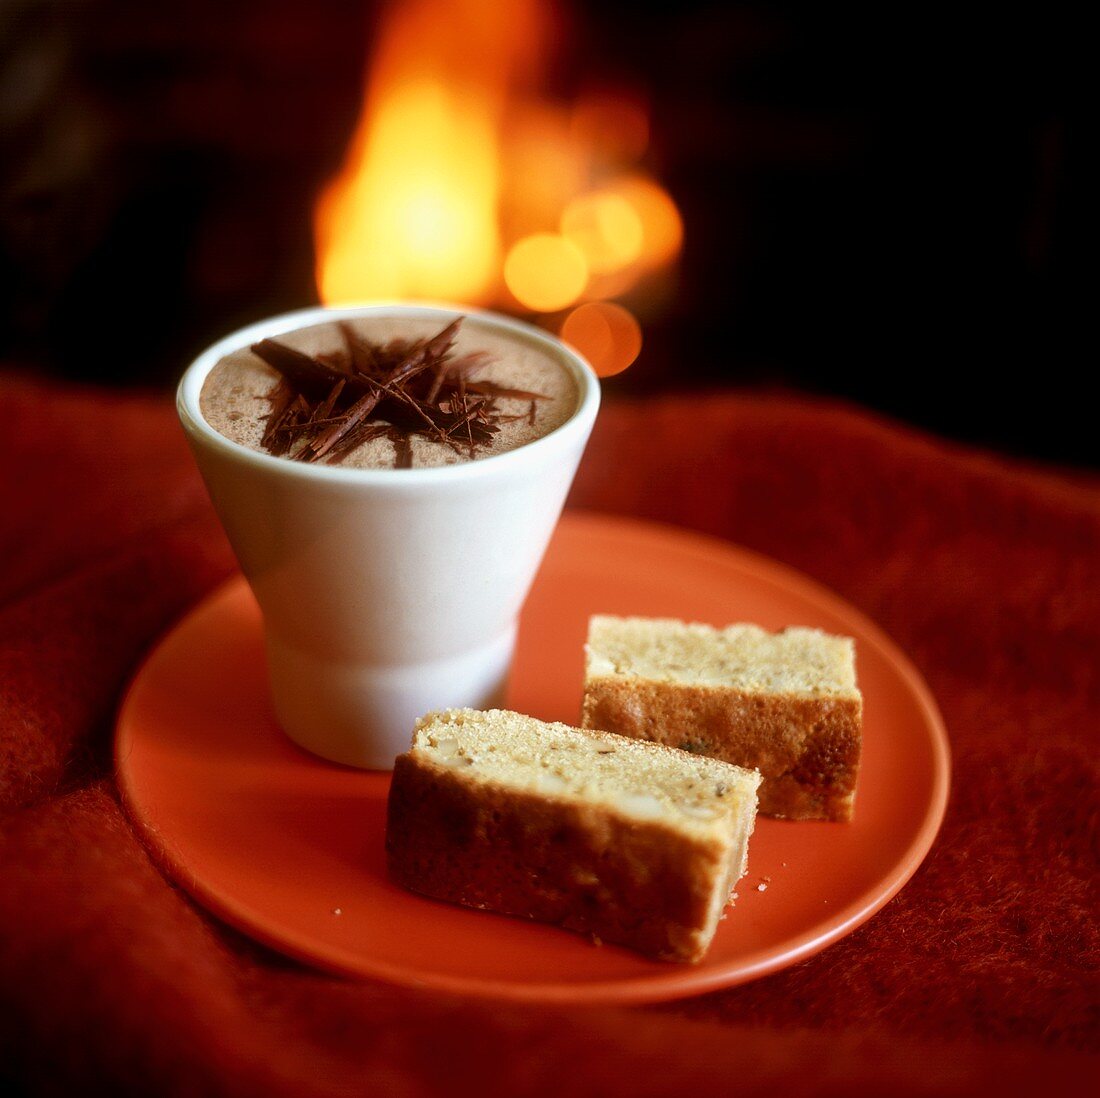 Beaker of hot chocolate & two pieces of nut cake by fireside